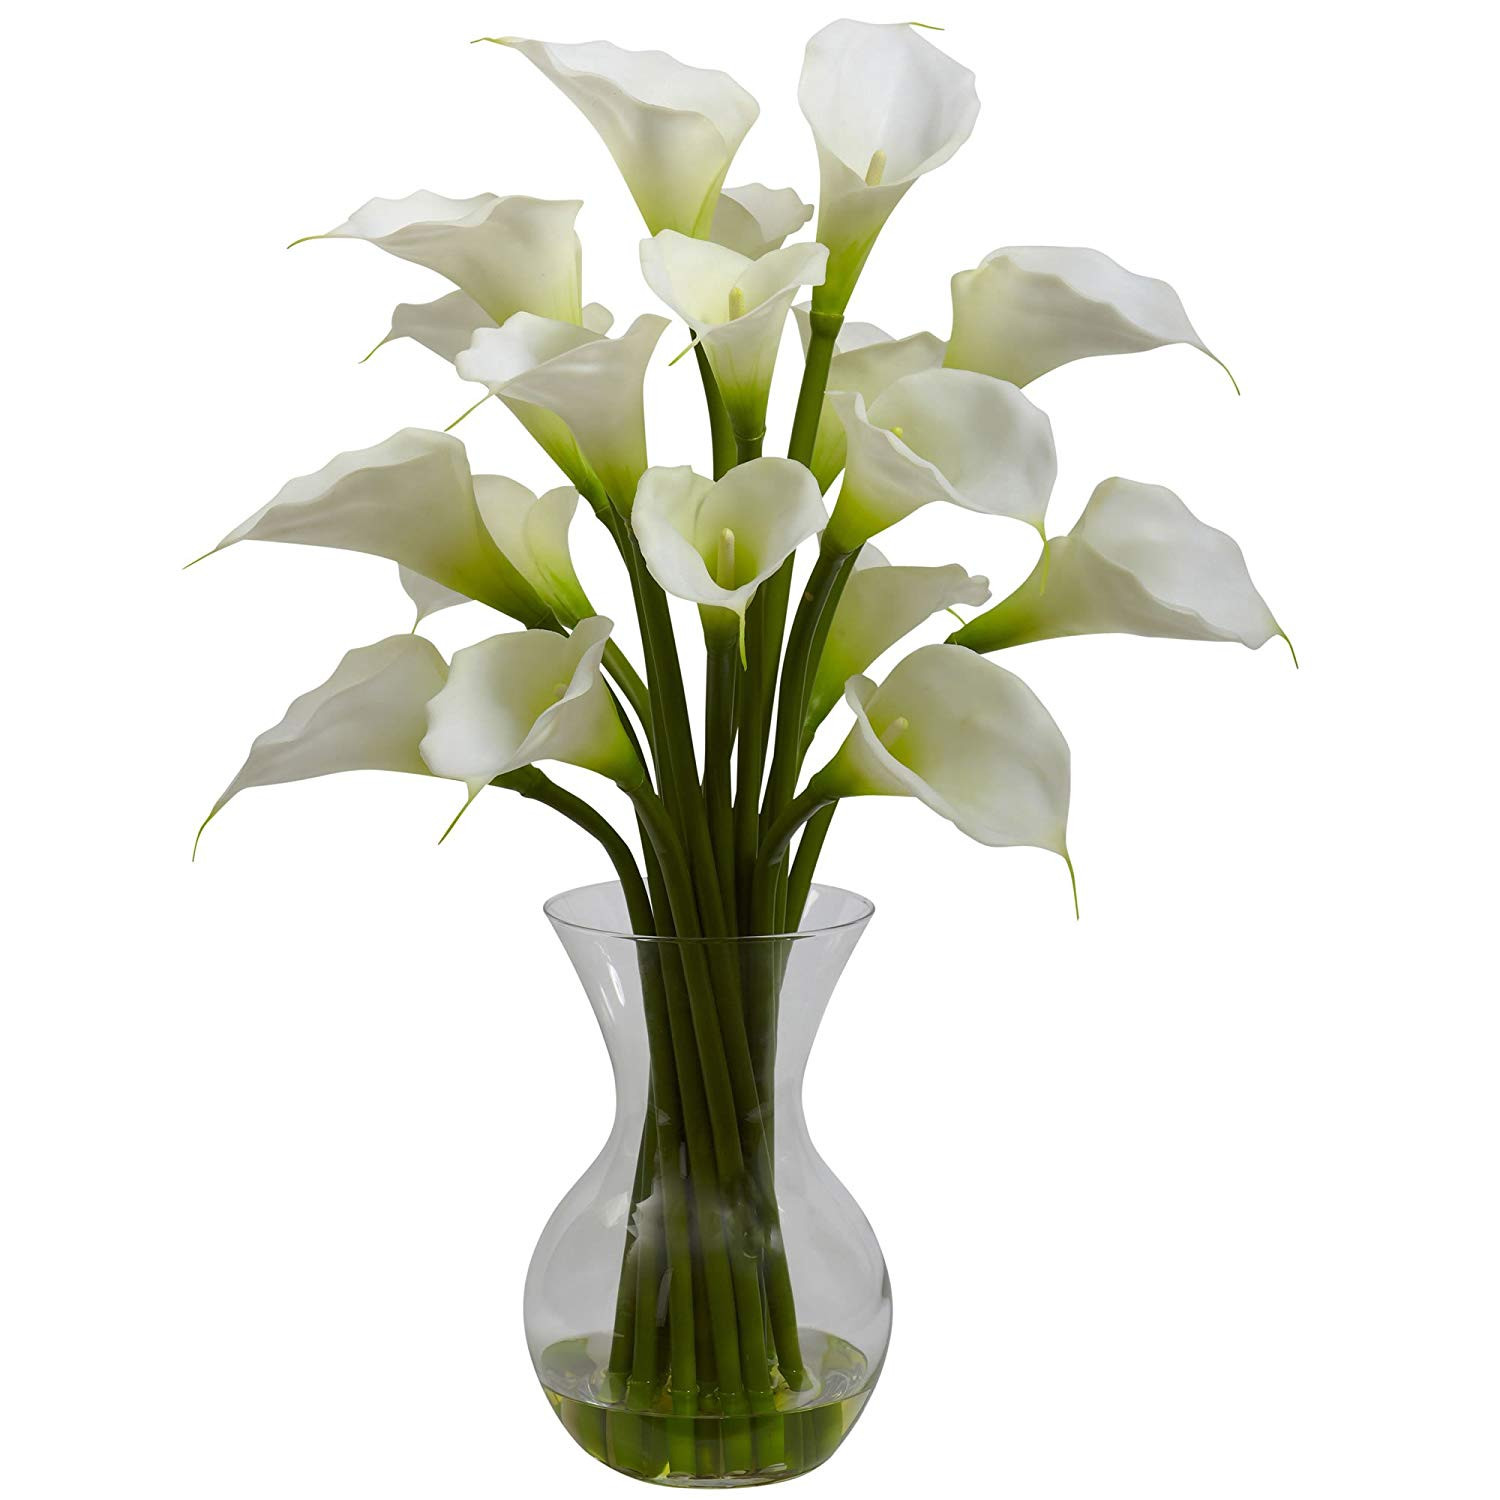 26 Elegant Large Decorative Vases for Sale 2024 free download large decorative vases for sale of amazon com nearly natural 1299 cr galla calla lily with vase pertaining to amazon com nearly natural 1299 cr galla calla lily with vase arrangement cream h